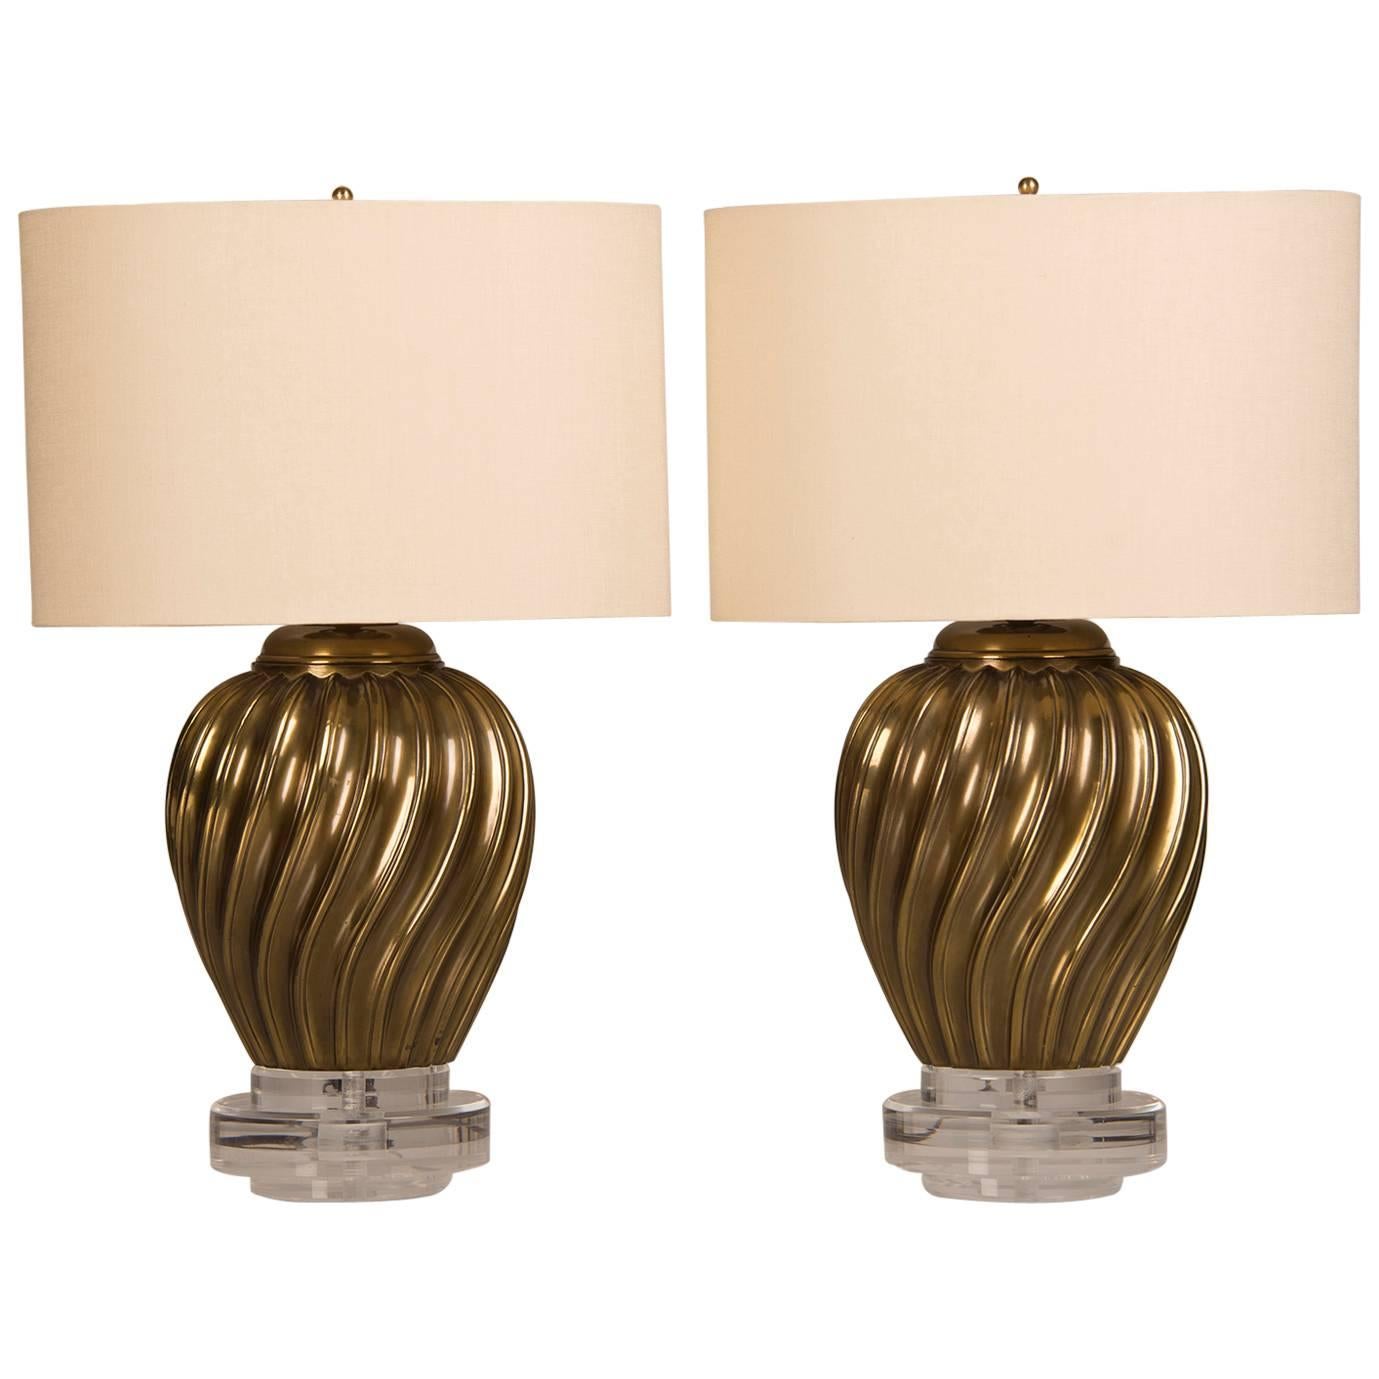 Pair of Italian Vintage Brass Swirl Vases Mounted as Custom Lamps, circa 1950 For Sale